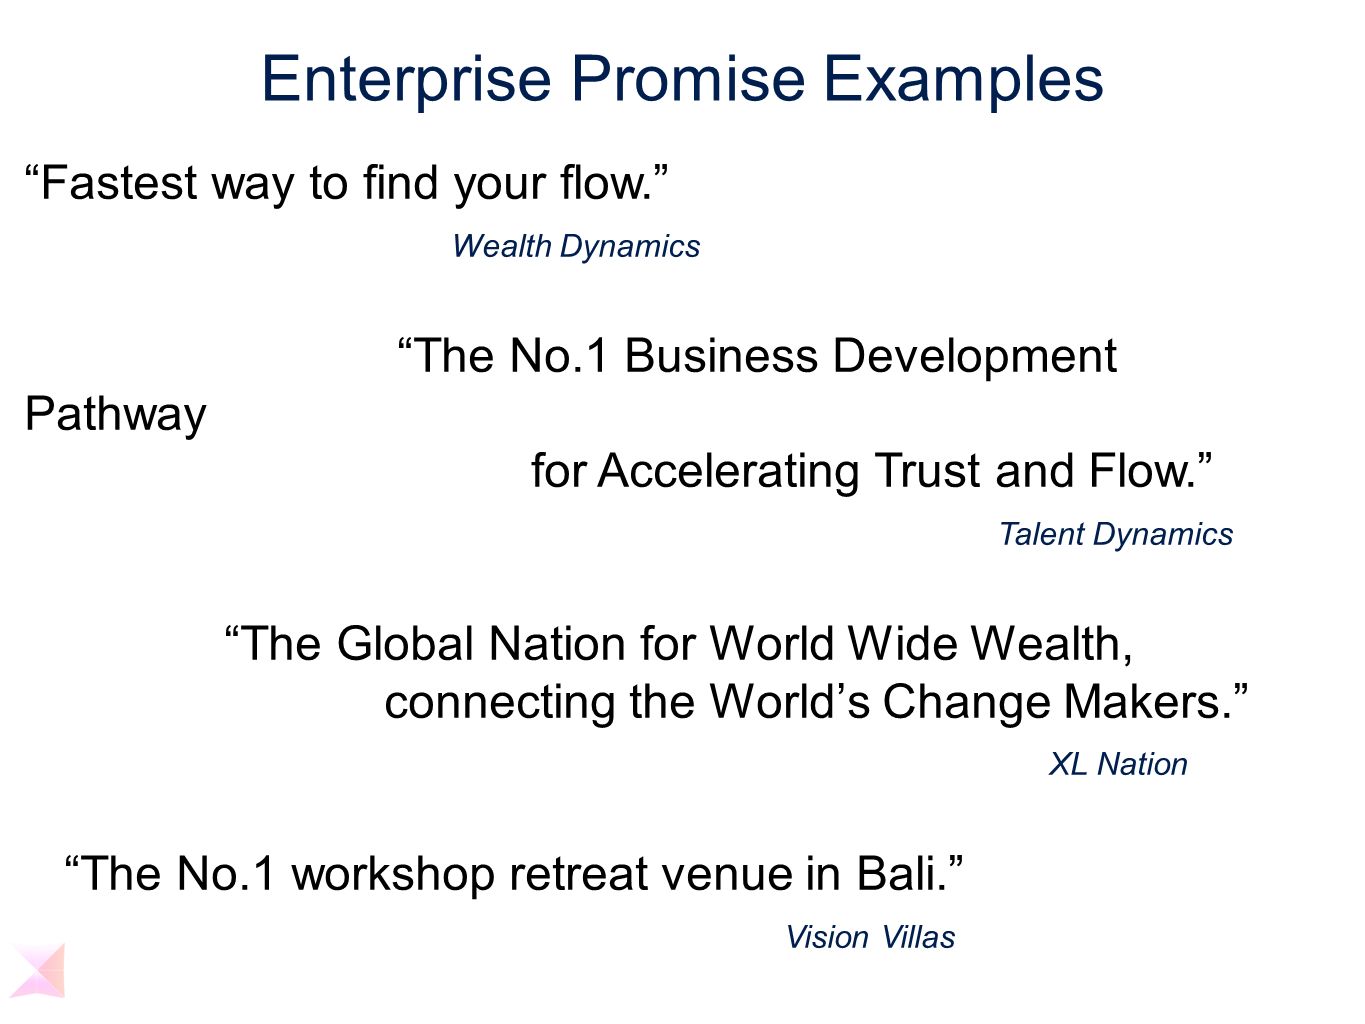 Enterprise Promise Examples Fastest way to find your flow. Wealth Dynamics The No.1 Business Development Pathway for Accelerating Trust and Flow. Talent Dynamics The Global Nation for World Wide Wealth, connecting the World’s Change Makers. XL Nation The No.1 workshop retreat venue in Bali. Vision Villas